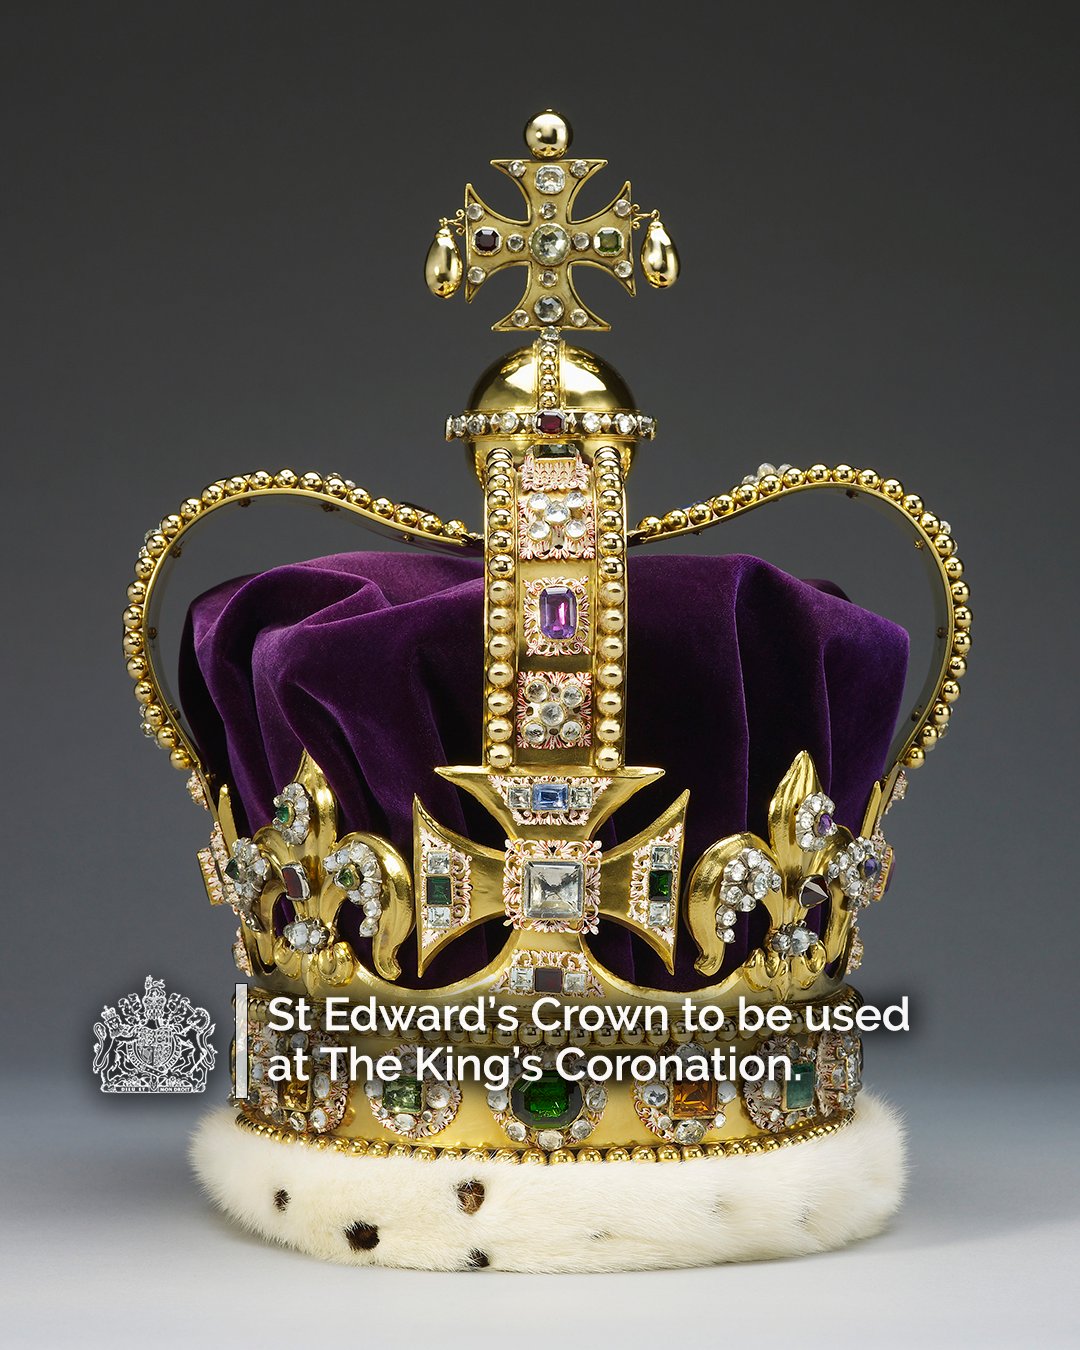 St. Edward’s Crown leaves Tower of London ahead of Coronation carded for May 2023